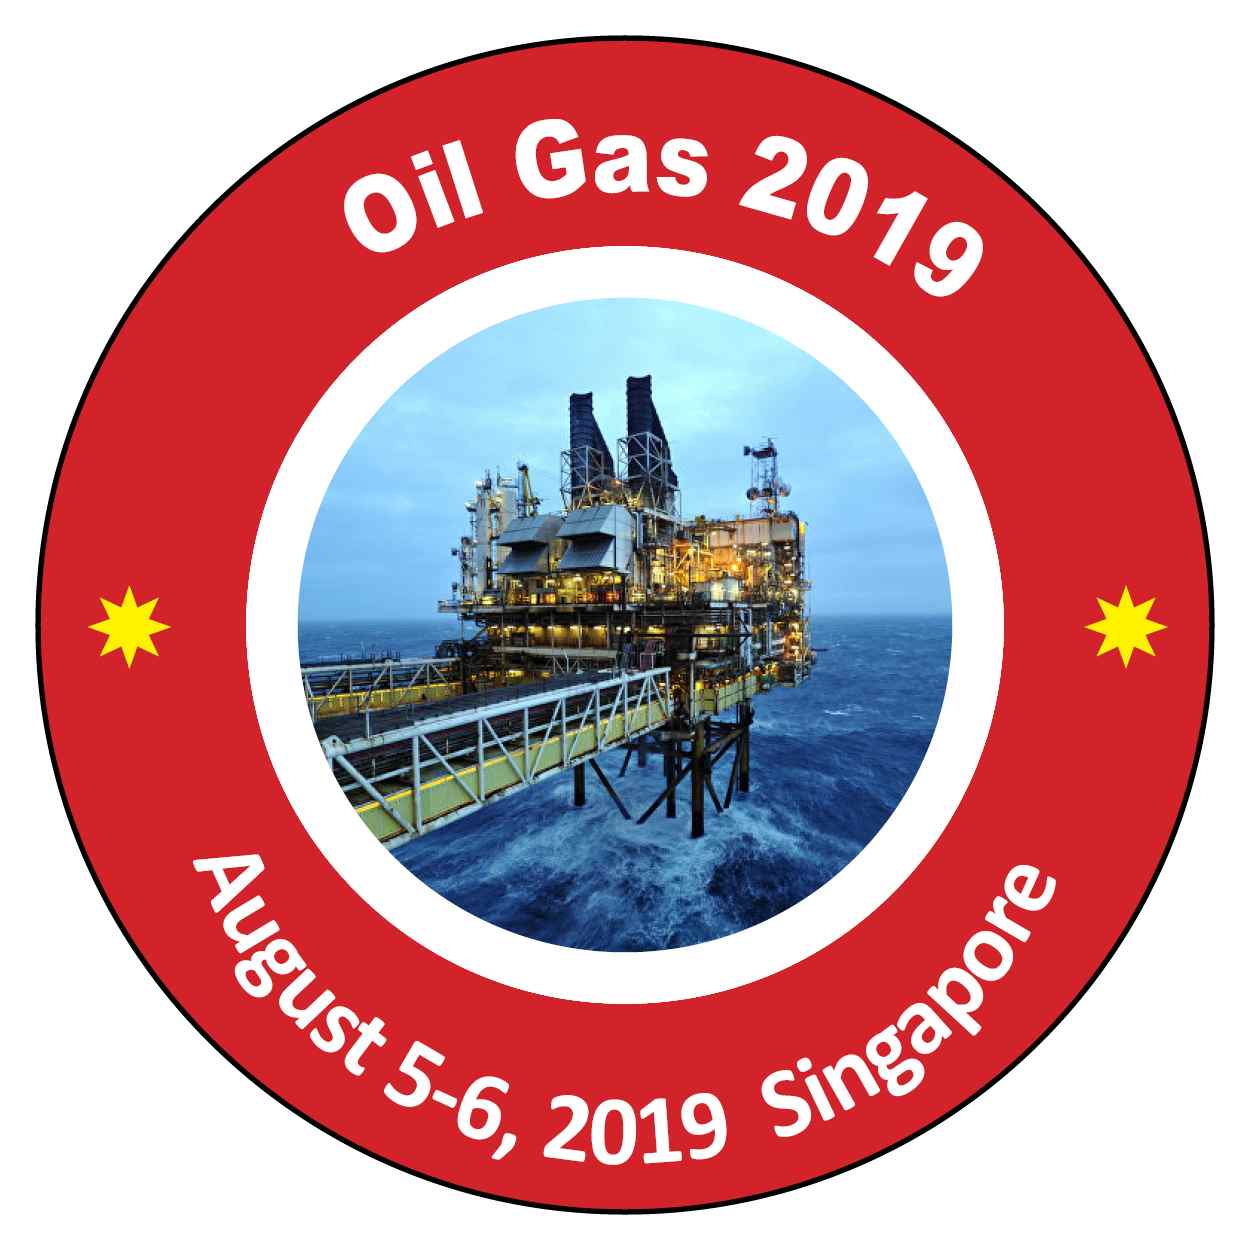 International Conference on Oil and Gas, Singapore, South West, Singapore